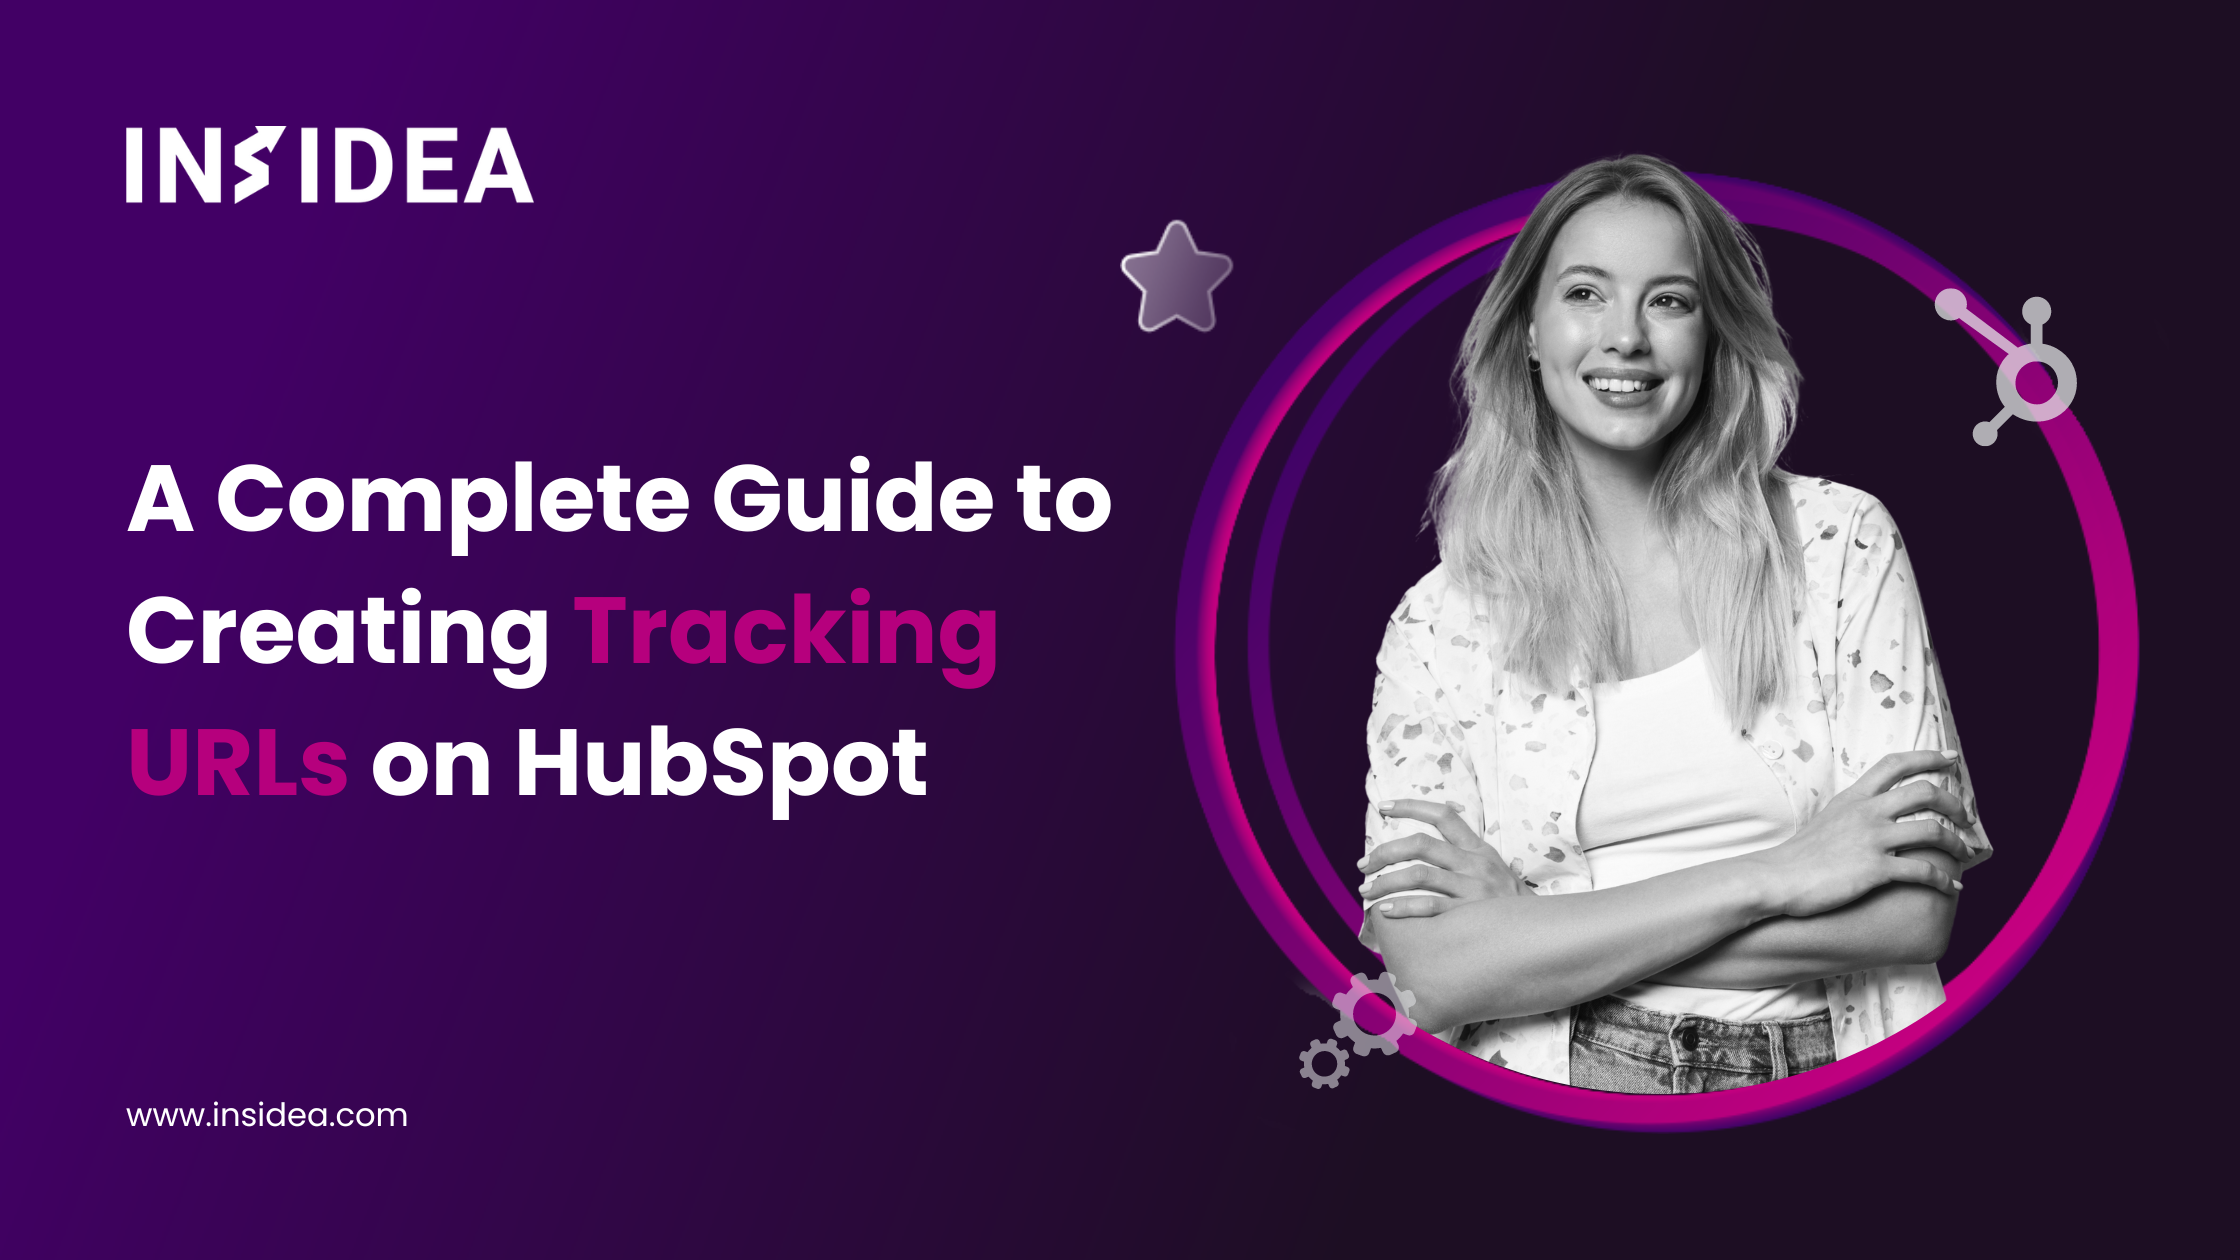 A Complete Guide to Creating Tracking URLs on HubSpot